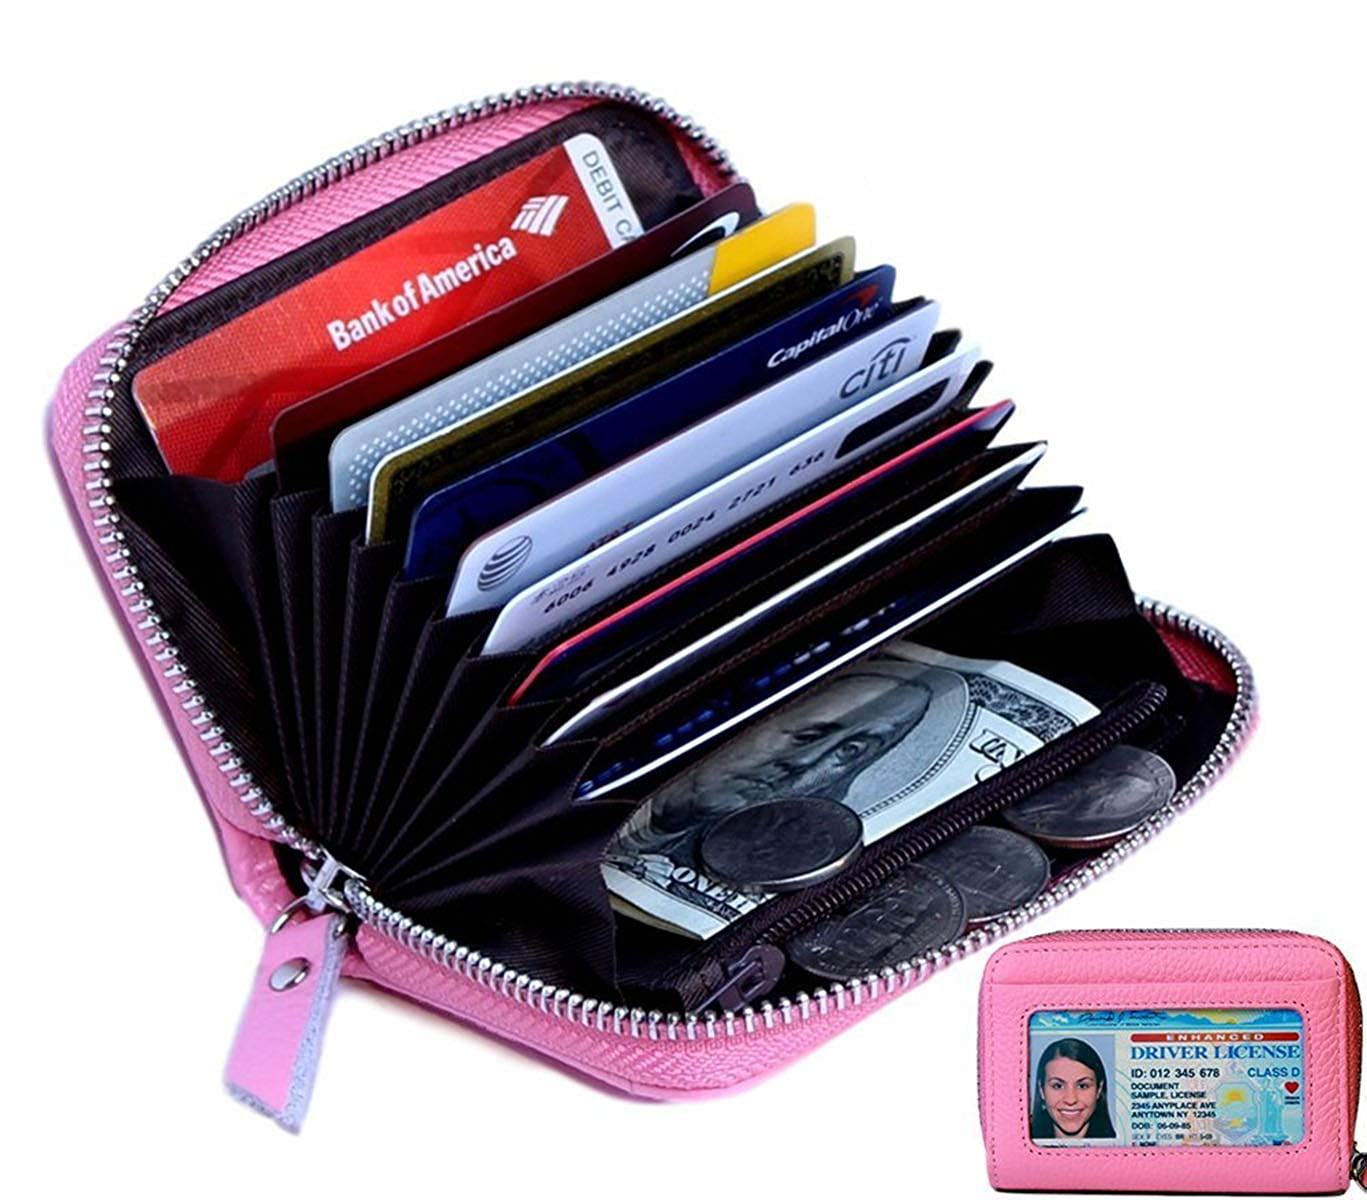 Personalized Envelope Design Travel Wallet with ID Window,Pink Credit Card Wallet Ultra-Thin Mini Ladies Wallet ZHHID Minimalist Leather Wallet Women